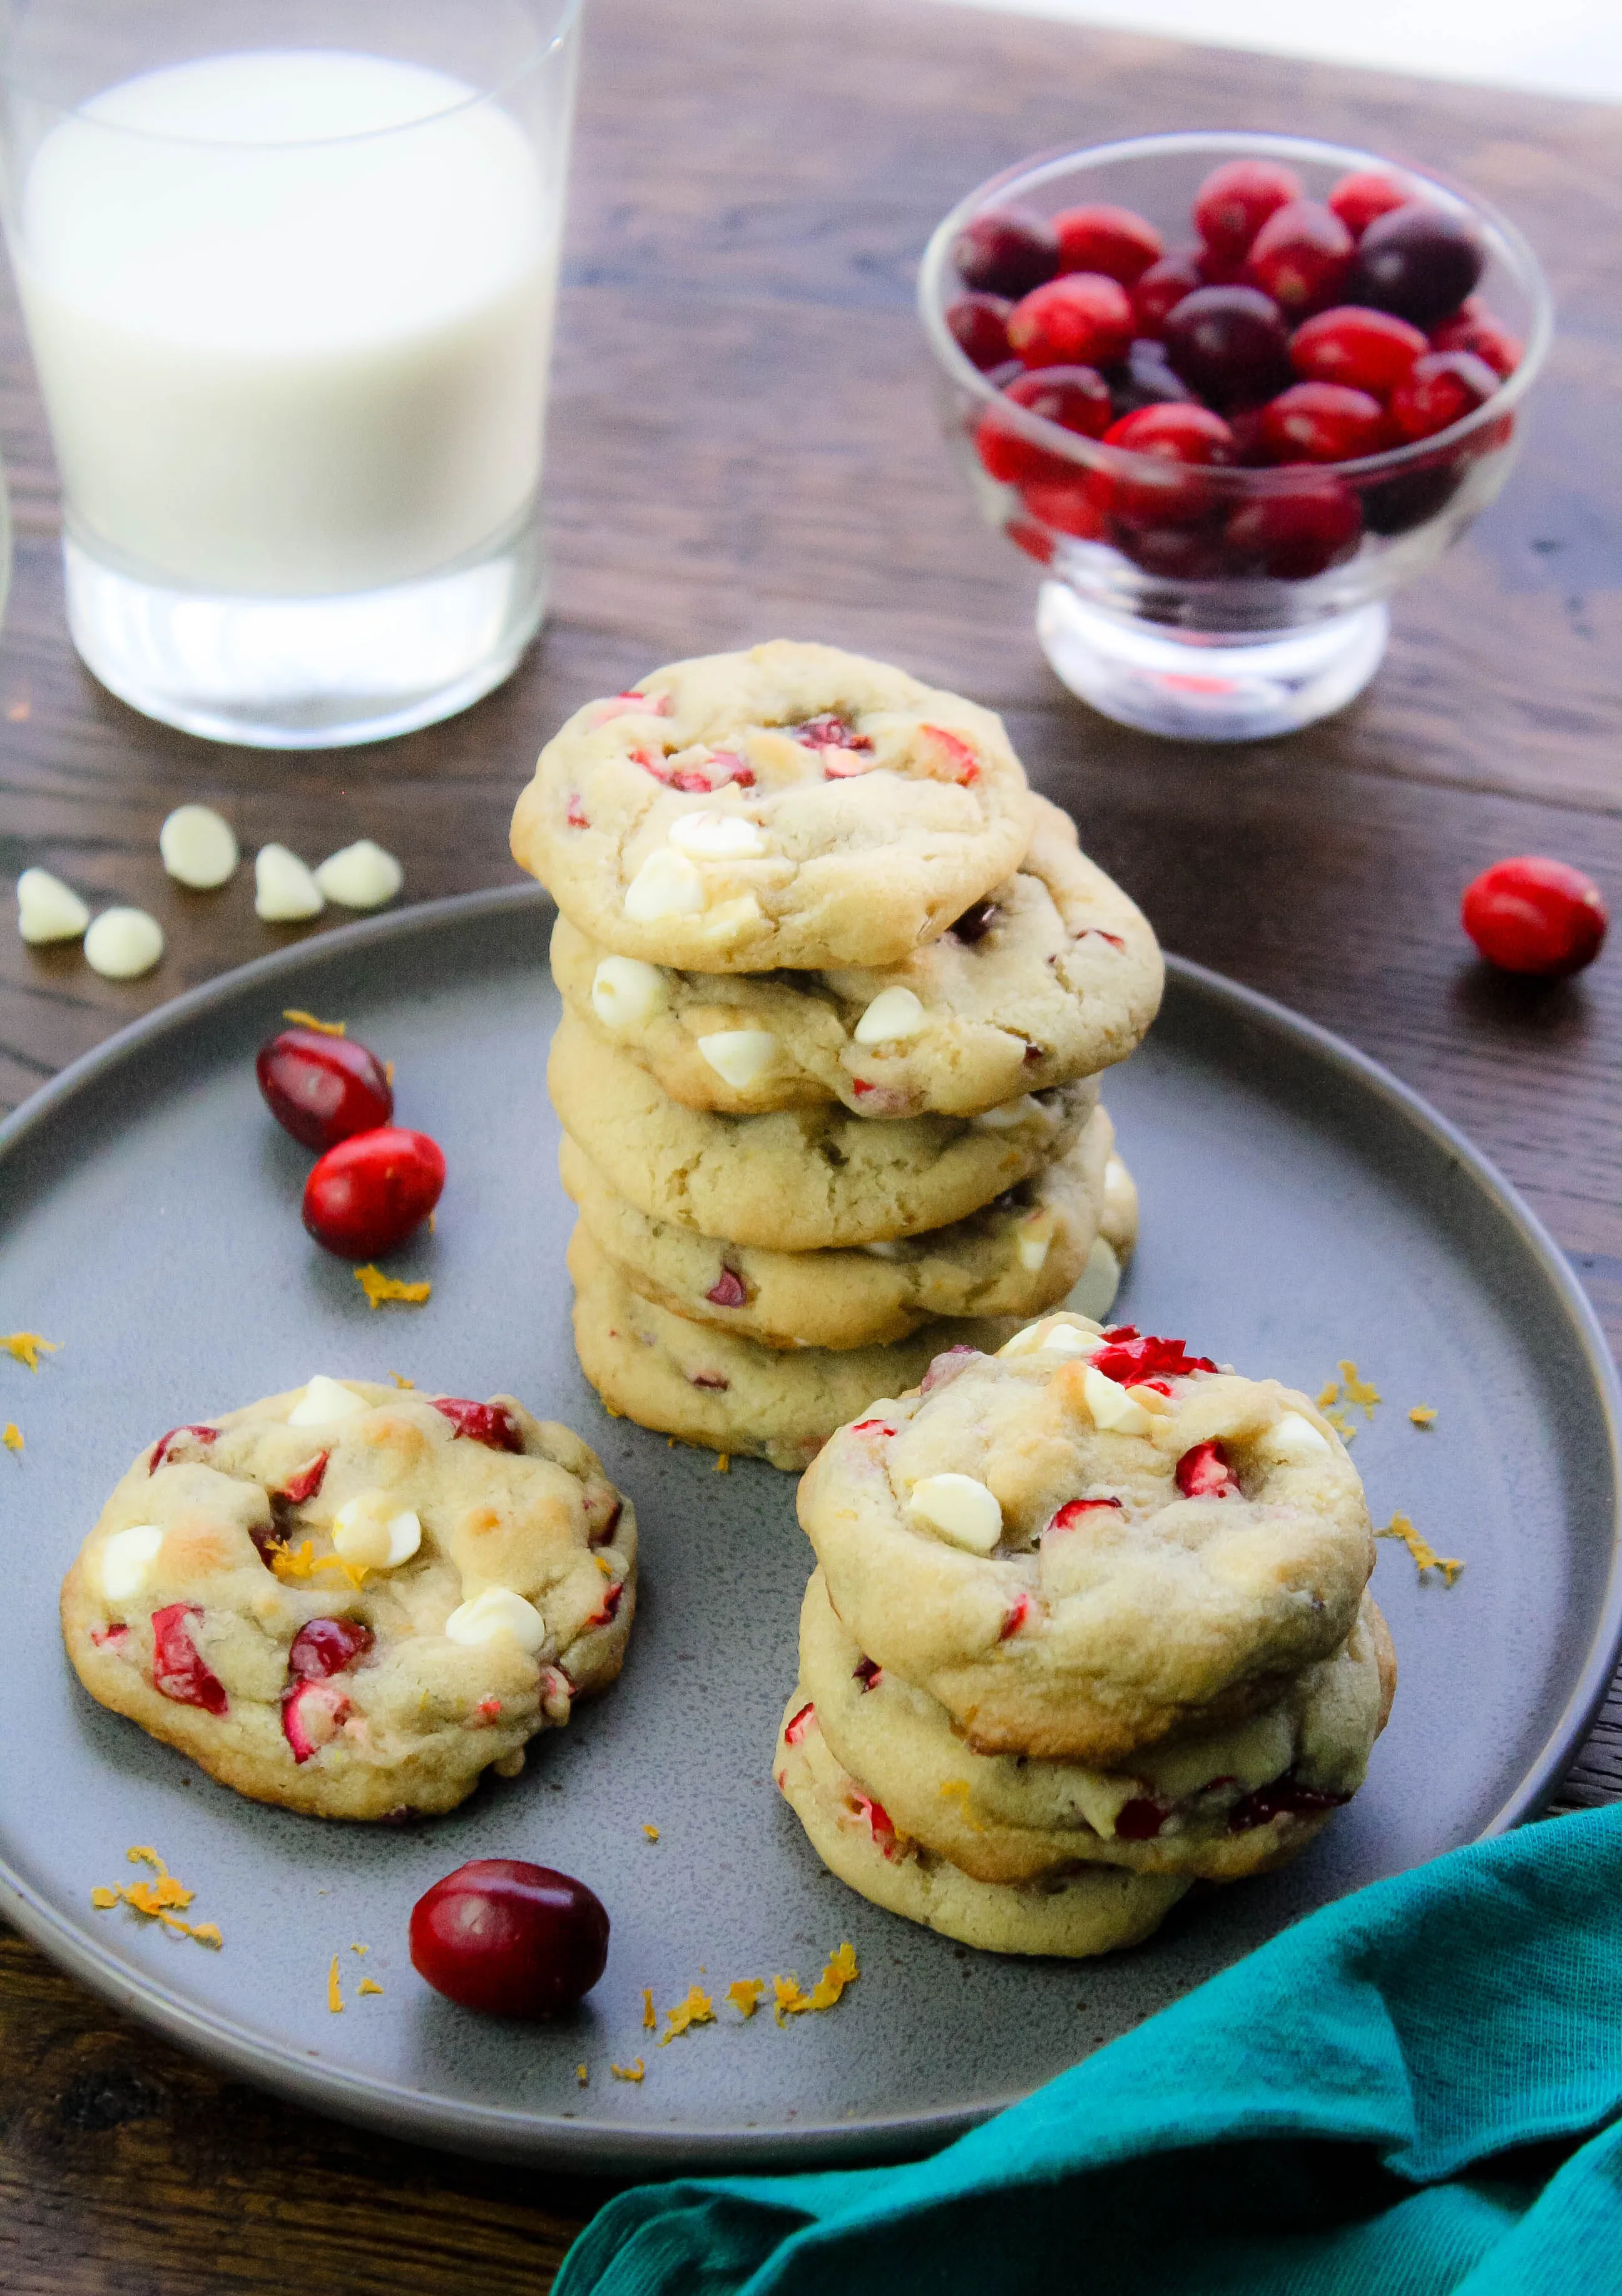 Cranberry-Orange White Chocolate Chip Cookies are super-tasty and great for the season! Cranberry-Orange White Chocolate Chip Cookies should be on your list to make!